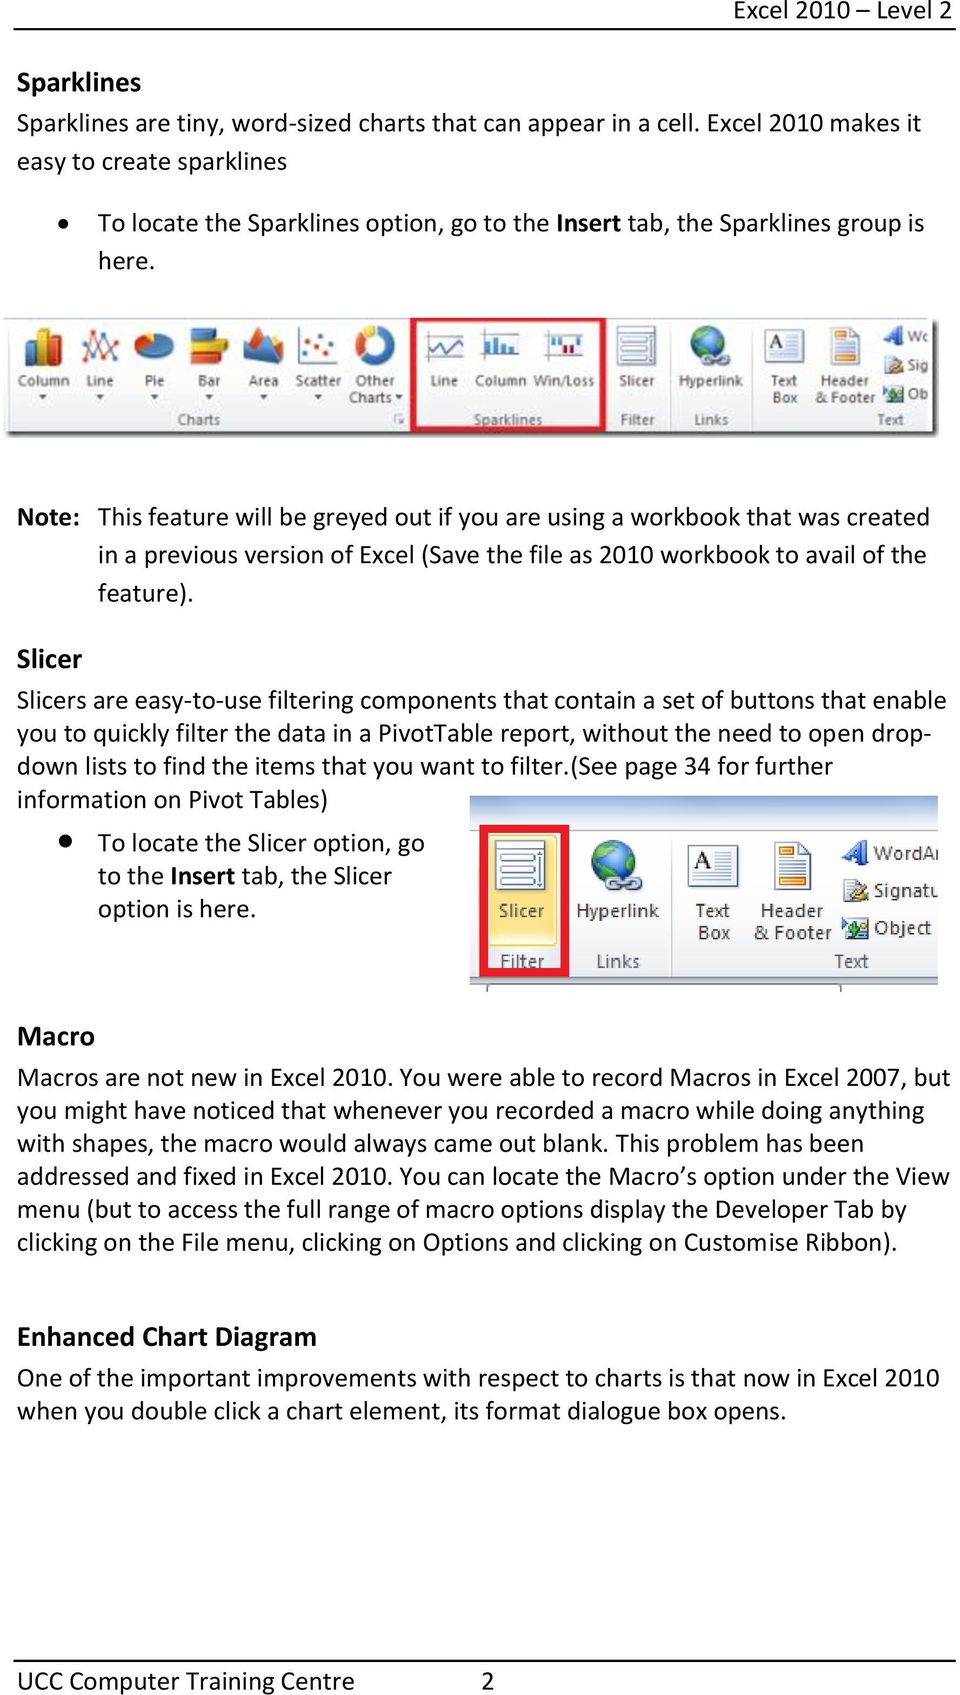 Note: This feature will be greyed out if you are using a workbook that was created in a previous version of Excel (Save the file as 2010 workbook to avail of the feature).